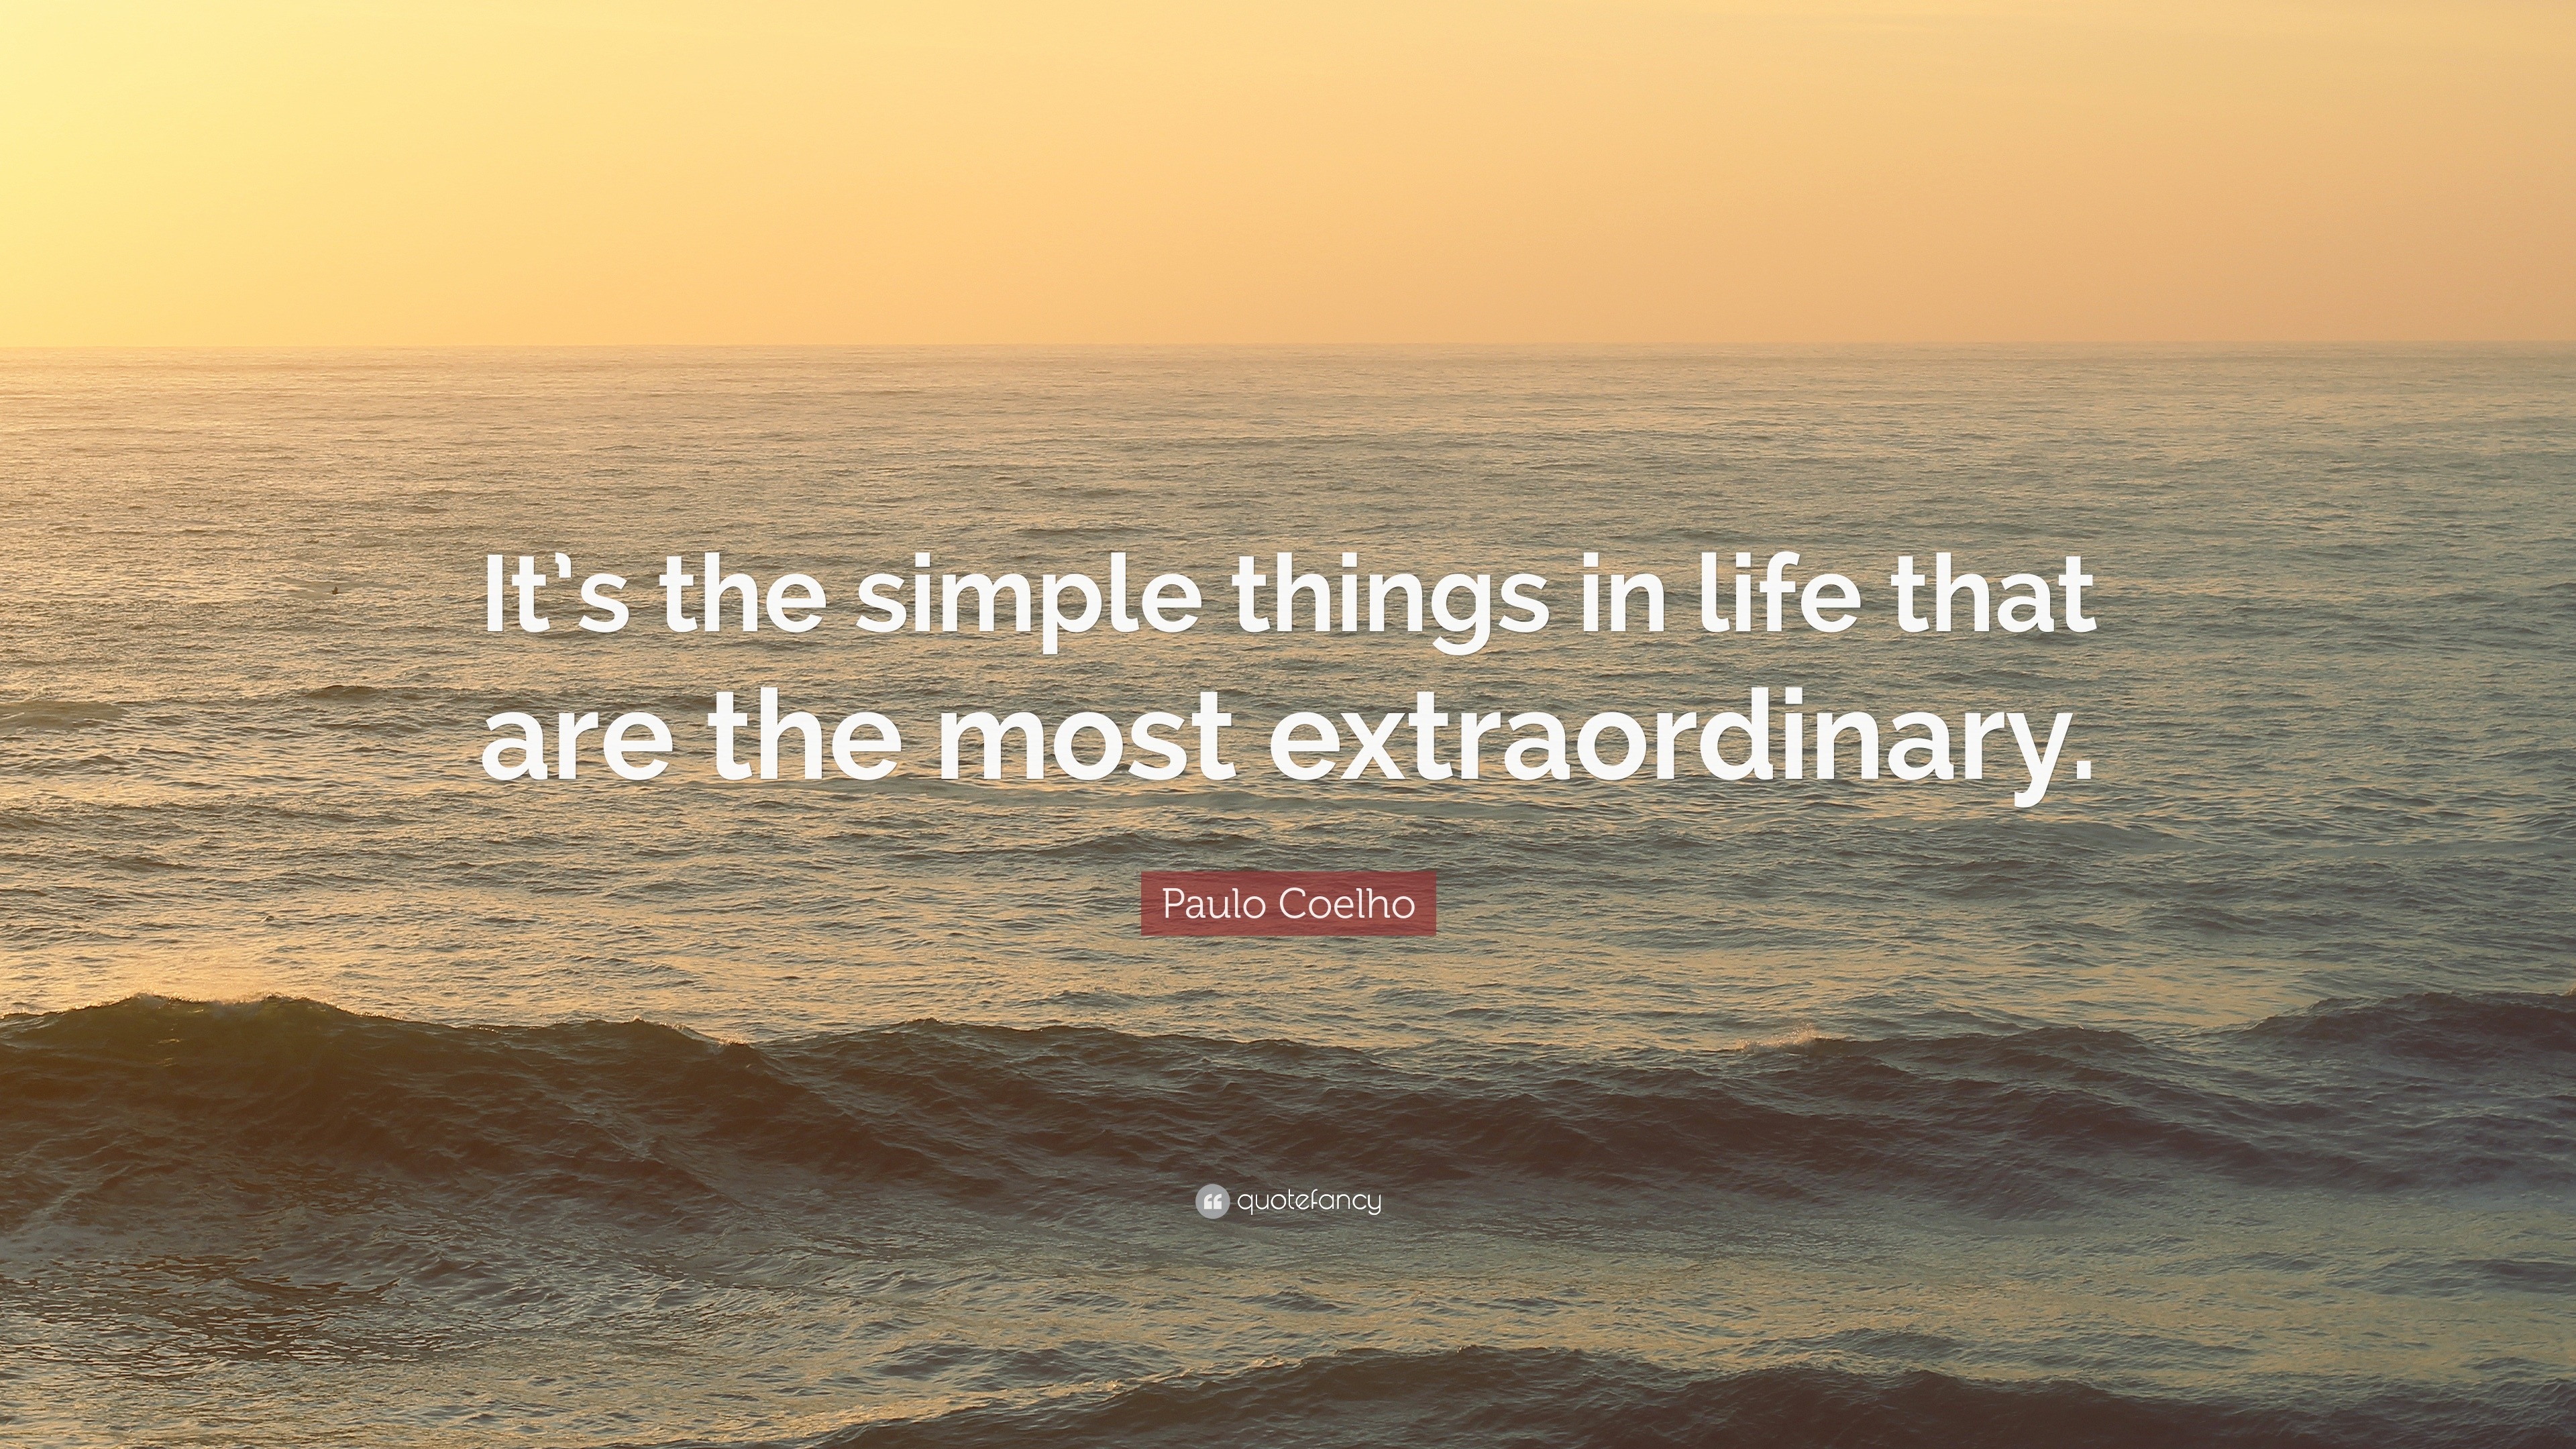 Paulo Coelho Quote: “It's The Simple Things In Life That Are The Most Extraordinary.”